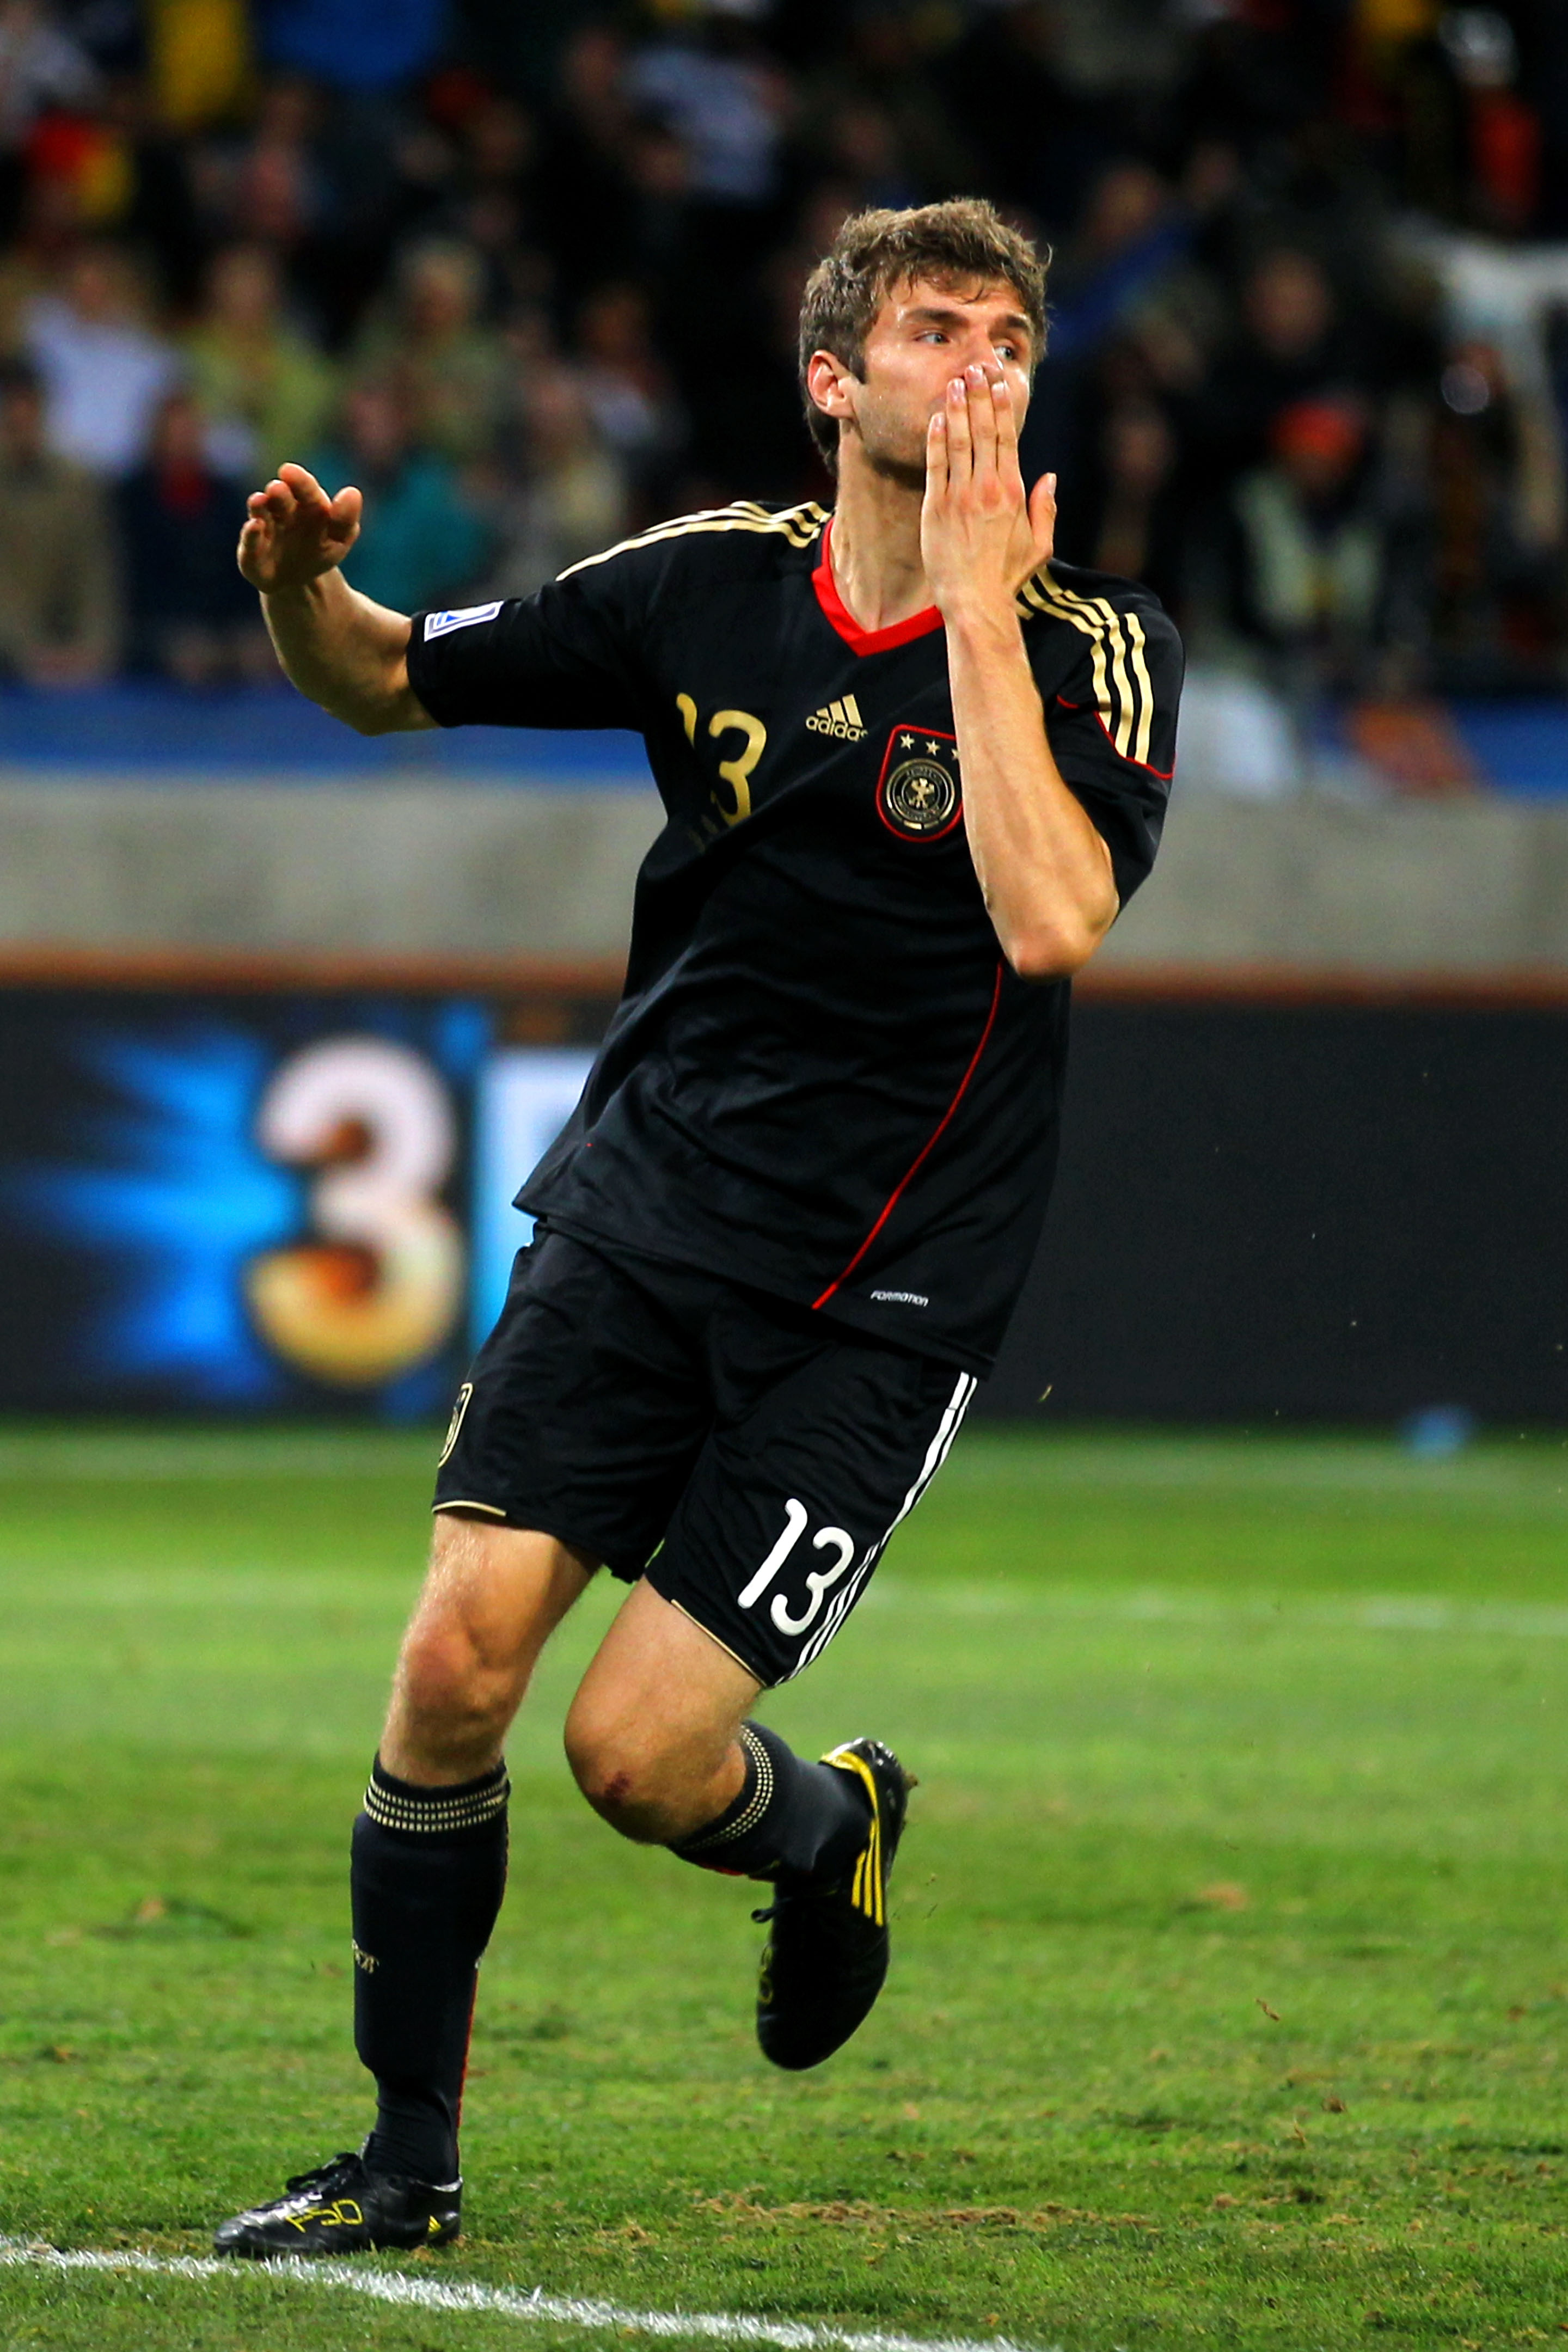 PORT ELIZABETH, SOUTH AFRICA - JULY 10: Thomas Mueller of Germany celebrates scoring the opening goal during the 2010 FIFA World Cup South Africa Third Place Play-off match between Uruguay and Germany at The Nelson Mandela Bay Stadium on July 10, 2010 in